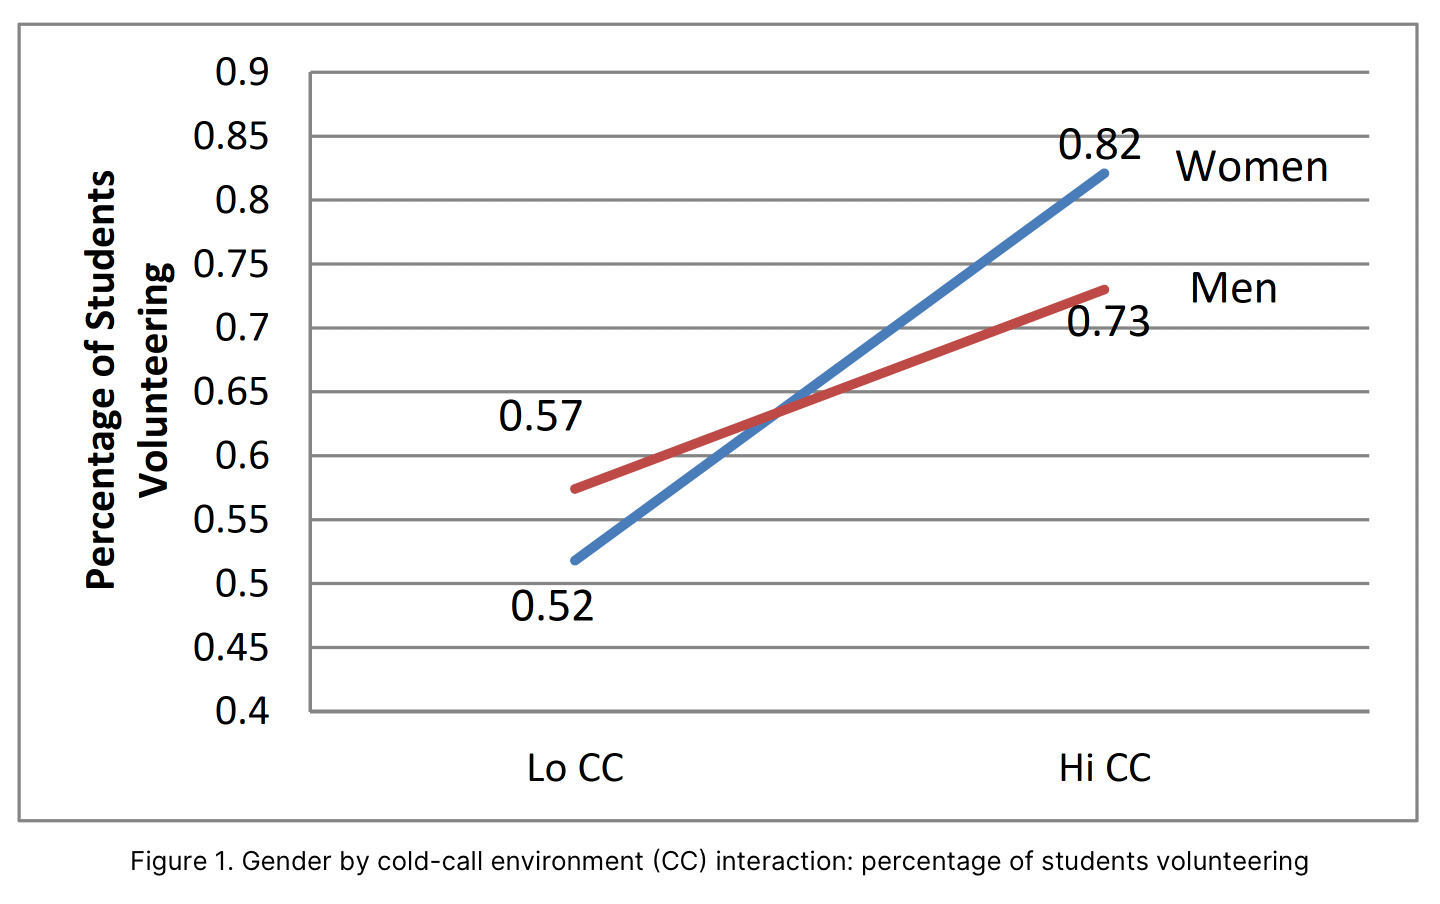 Figure 1. Gender by cold-call environment (CC) interaction: percentage of students volunteering